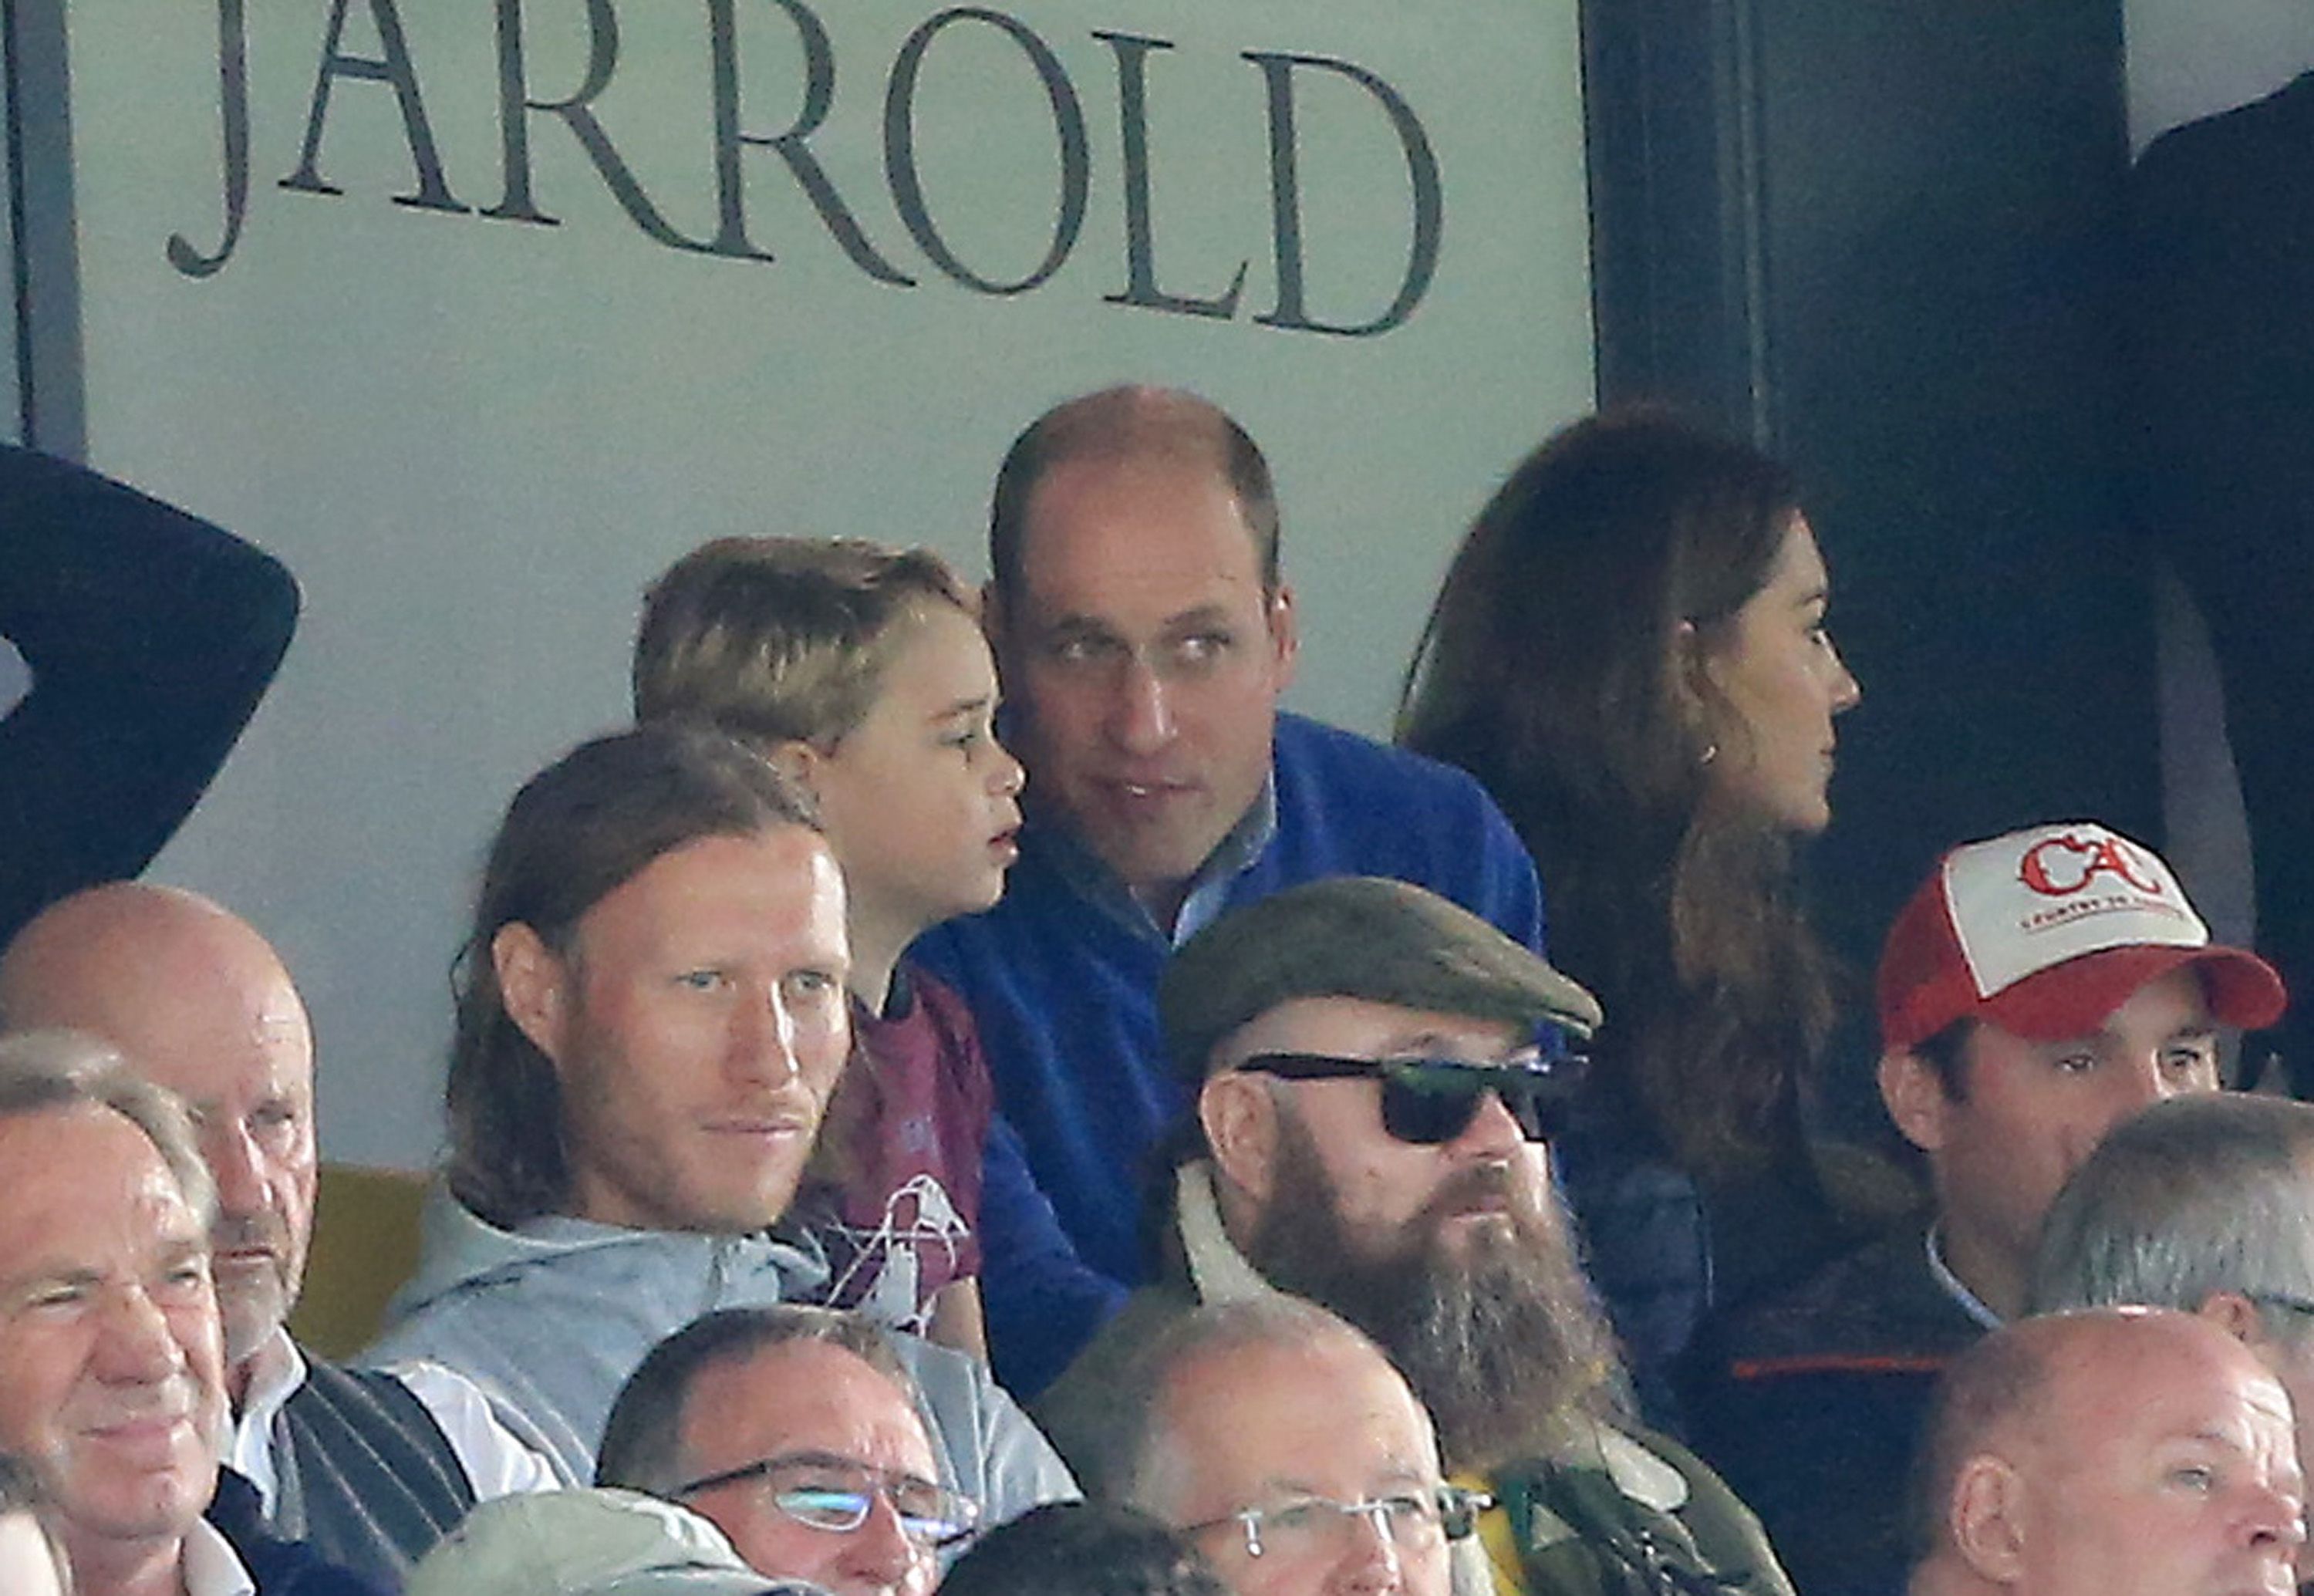 Prince George Cheers On His Favorite Team With Prince William And Kate Middleton